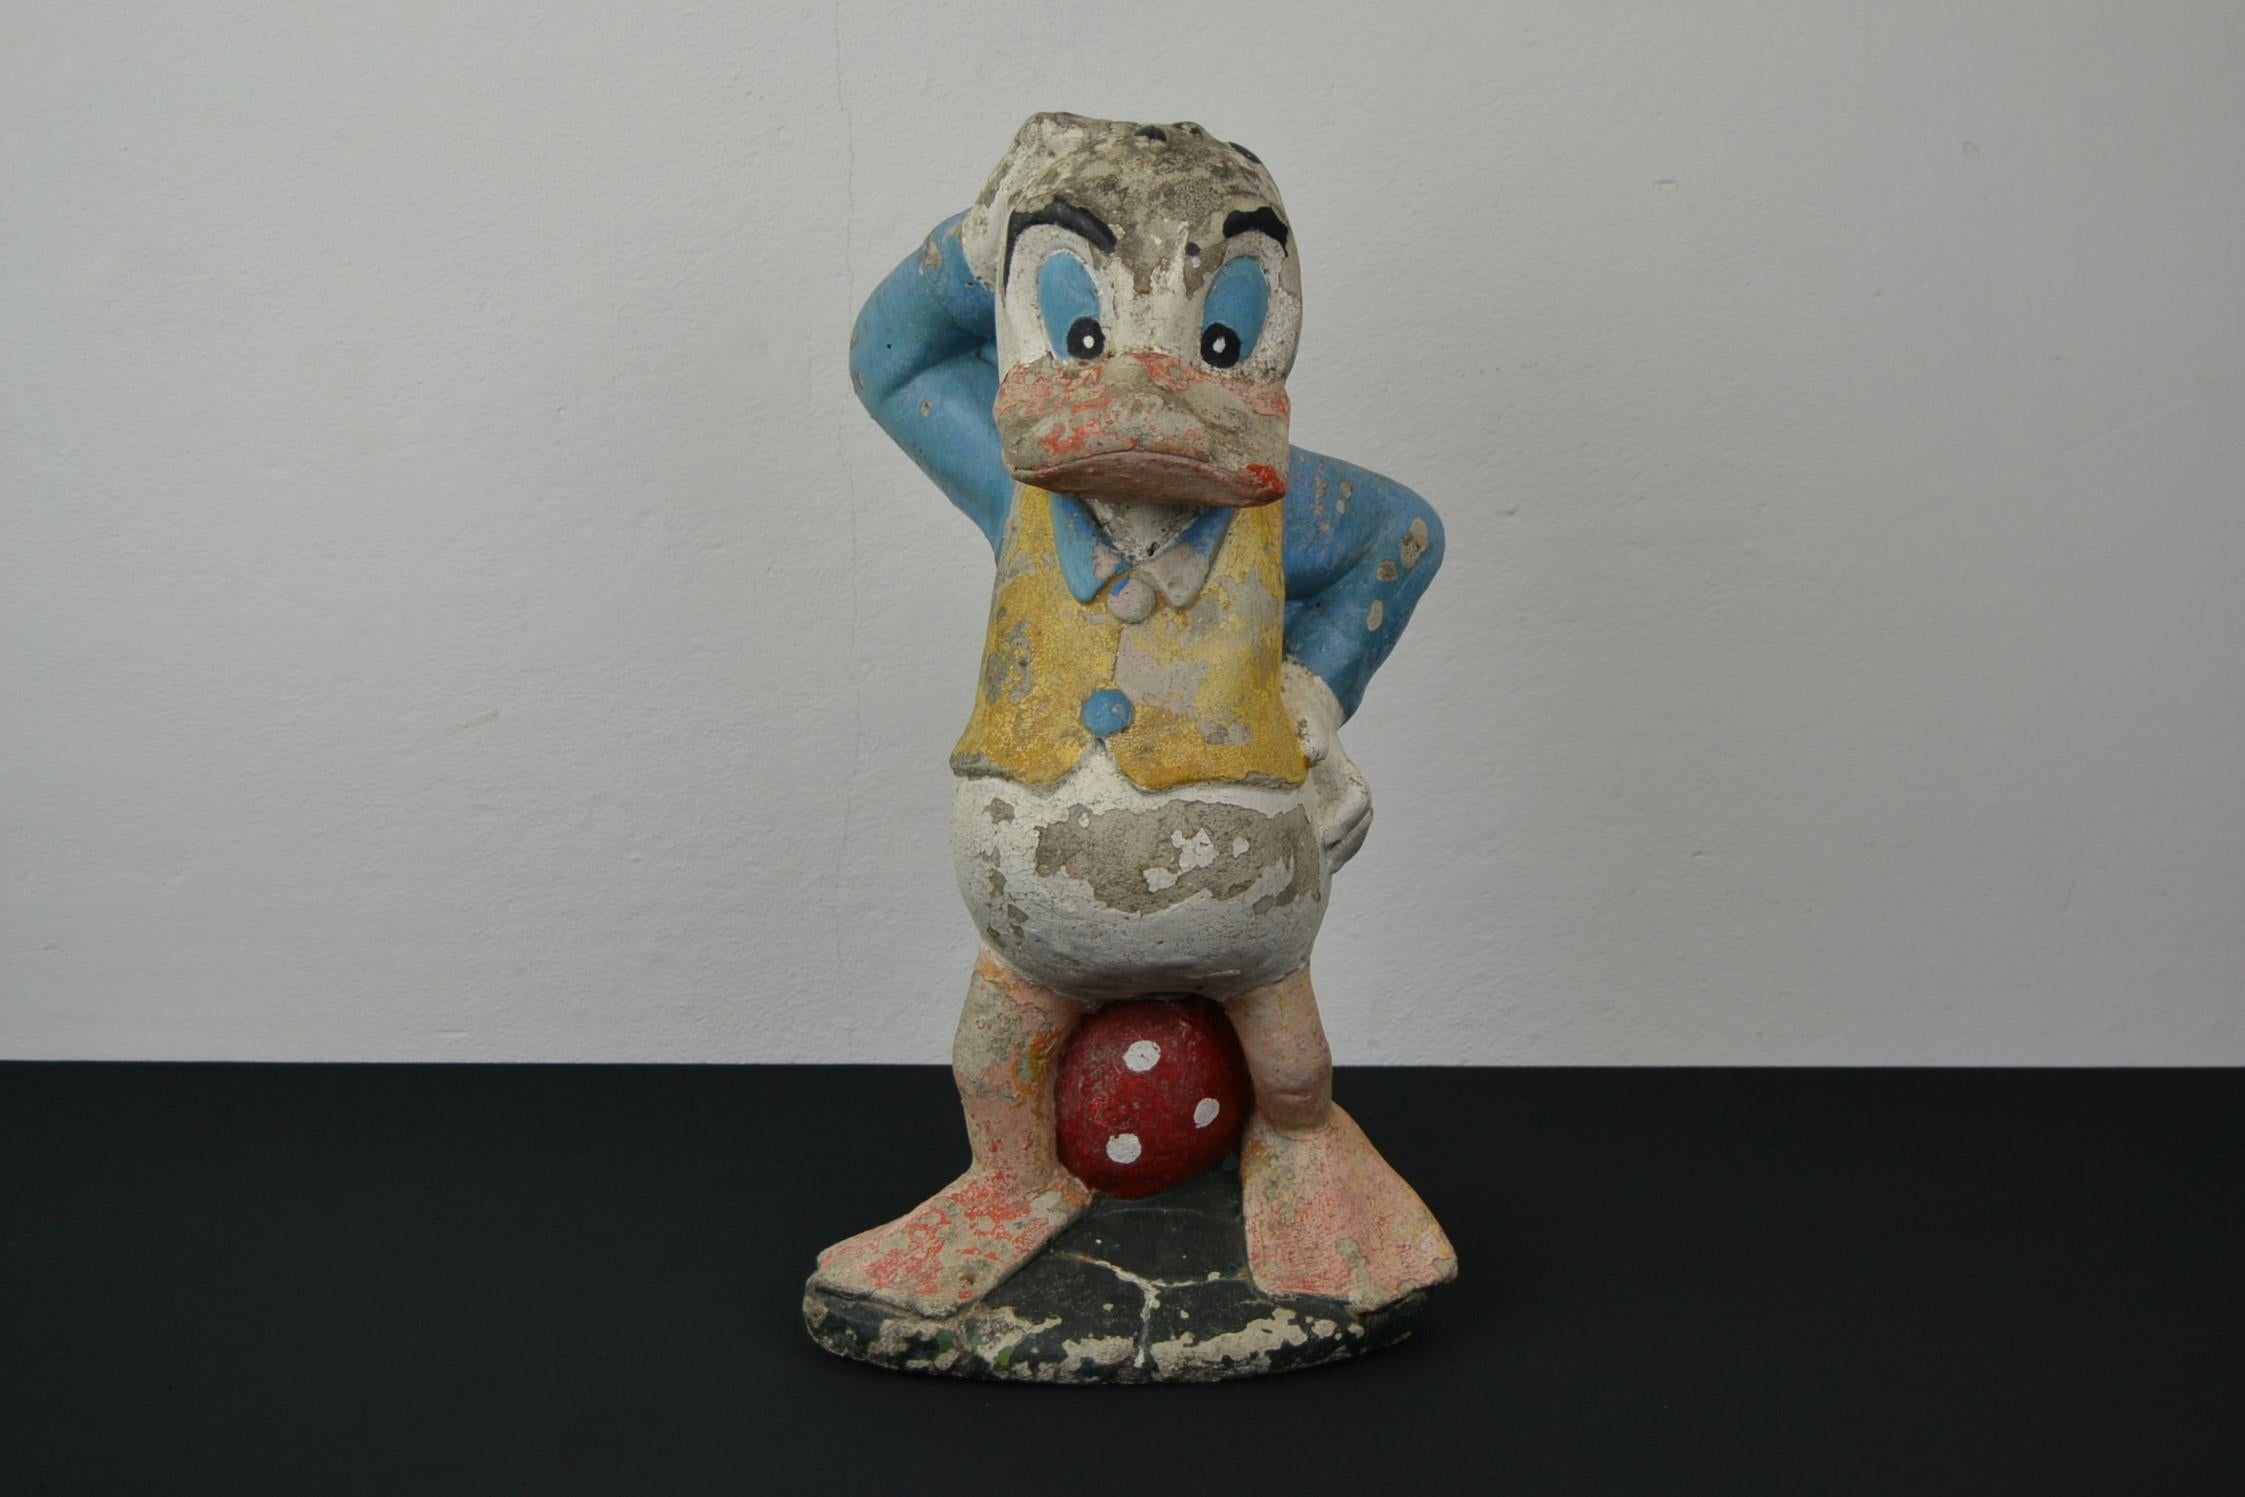 Concrete donald duck Statue. 
Donald Duck sculpture 
made of painted concrete - painted stone - composite stone.
He's wearing a blue and yellow jacket and is resting on a red and white mushroom.
During the years he got a charming old patina.